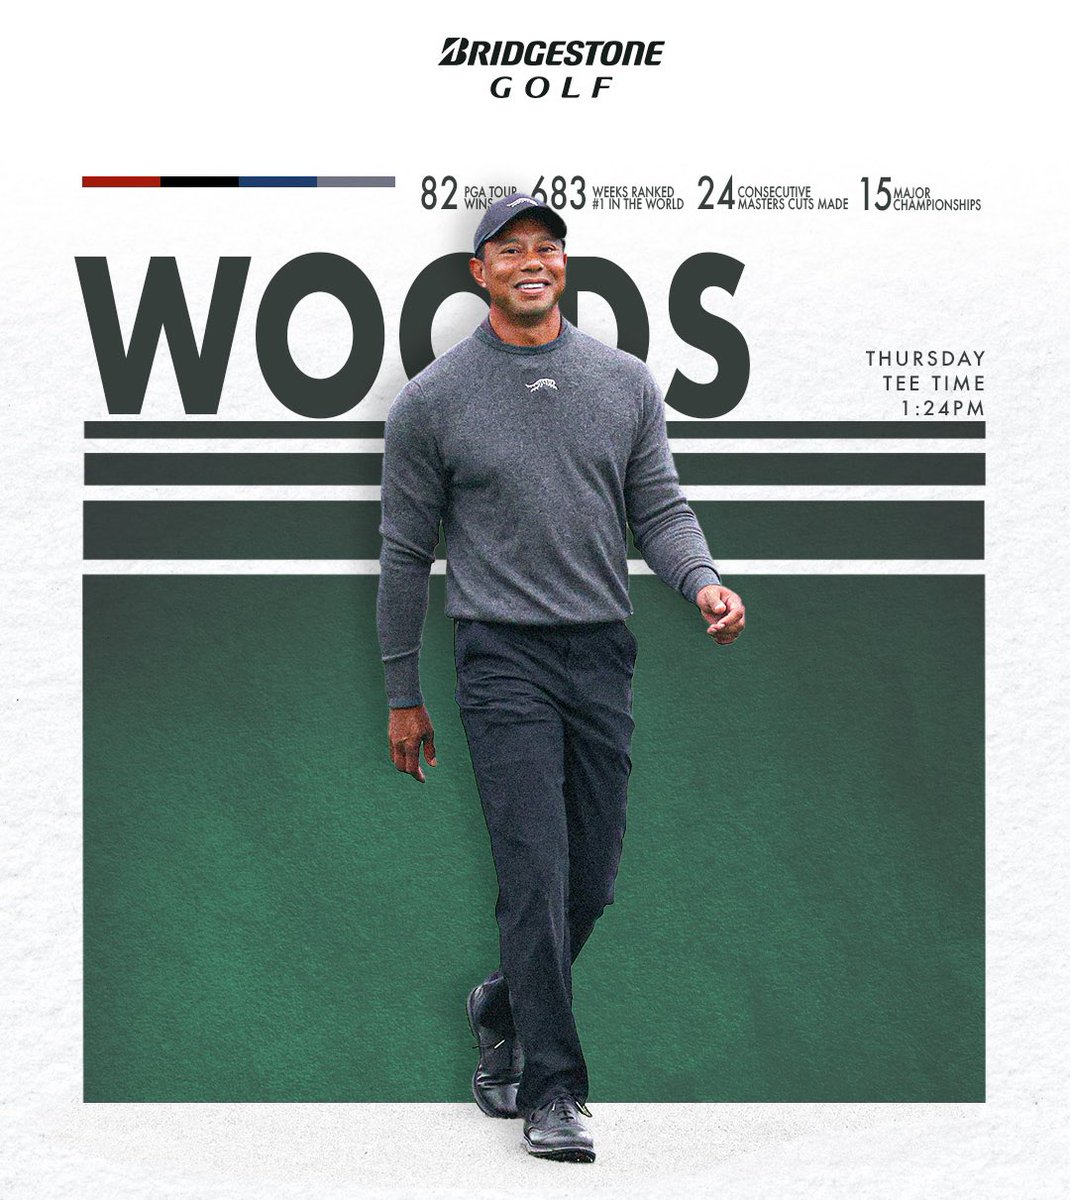 Seeking his 16th Major and 6th green jacket, Tiger Woods heads to Augusta with a wealth of course knowledge and a lot of positive vibes in Georgia. Excitement is at an all-time high this week! #TheMasters #TeamBridgestone